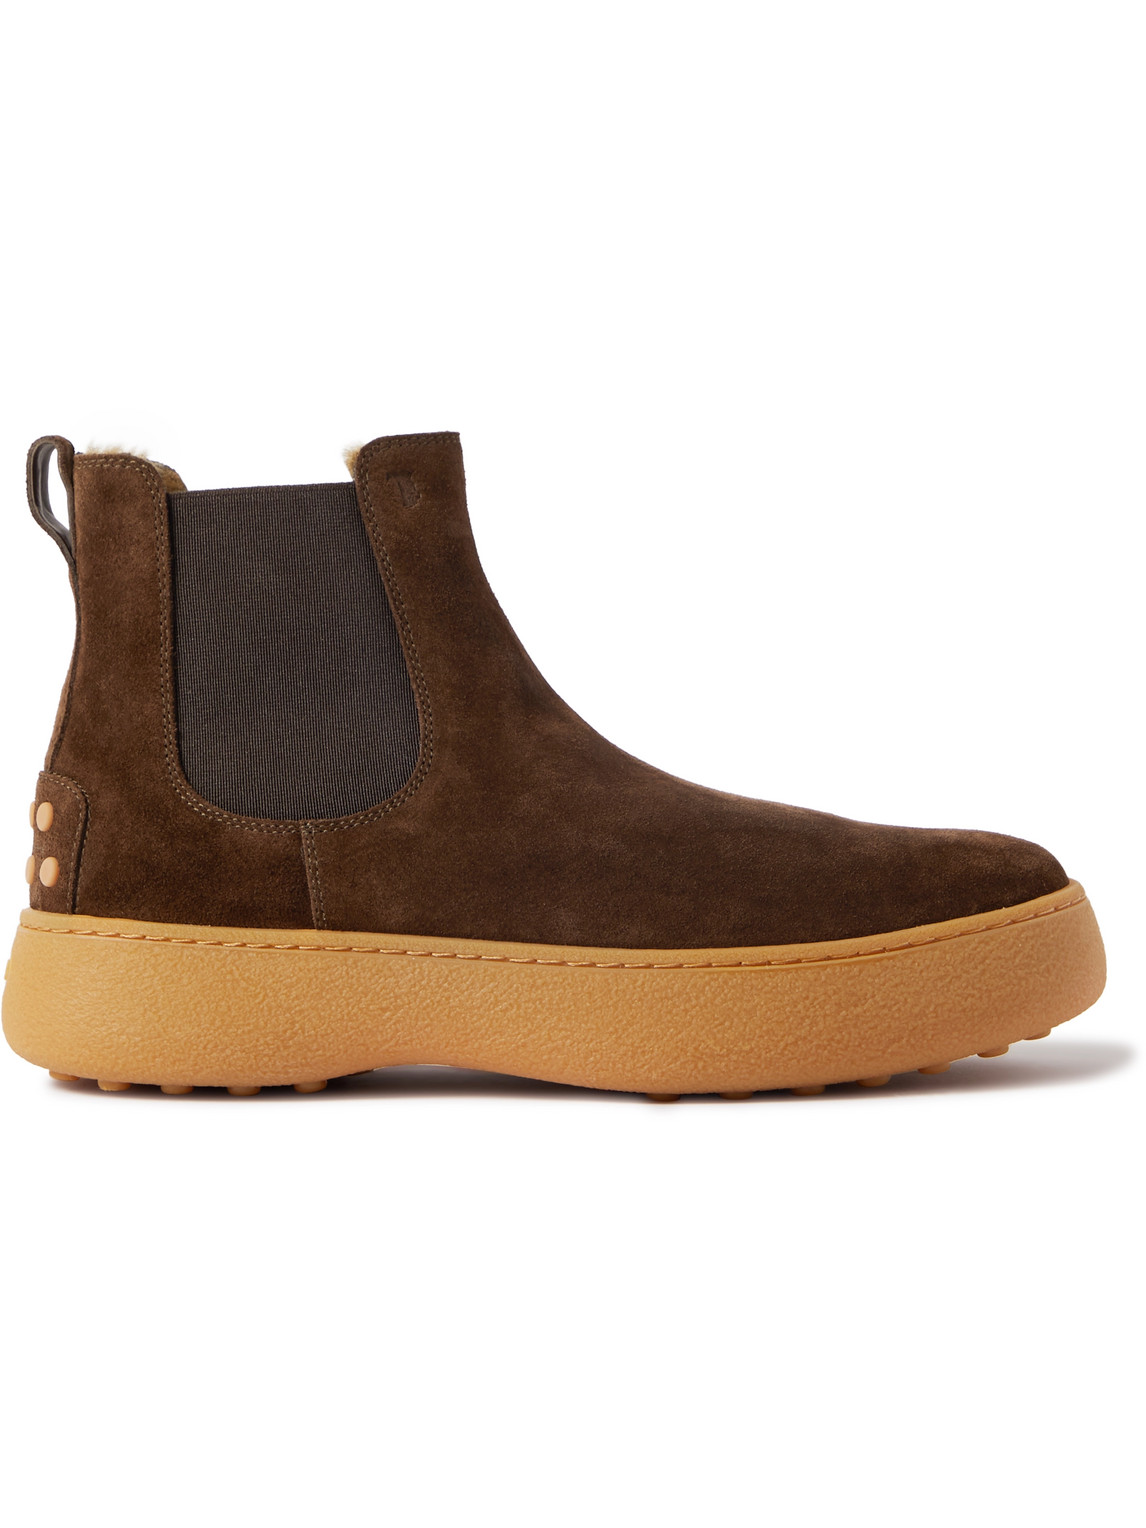 Tod's Shearling-Lined Suede Chelsea Boots